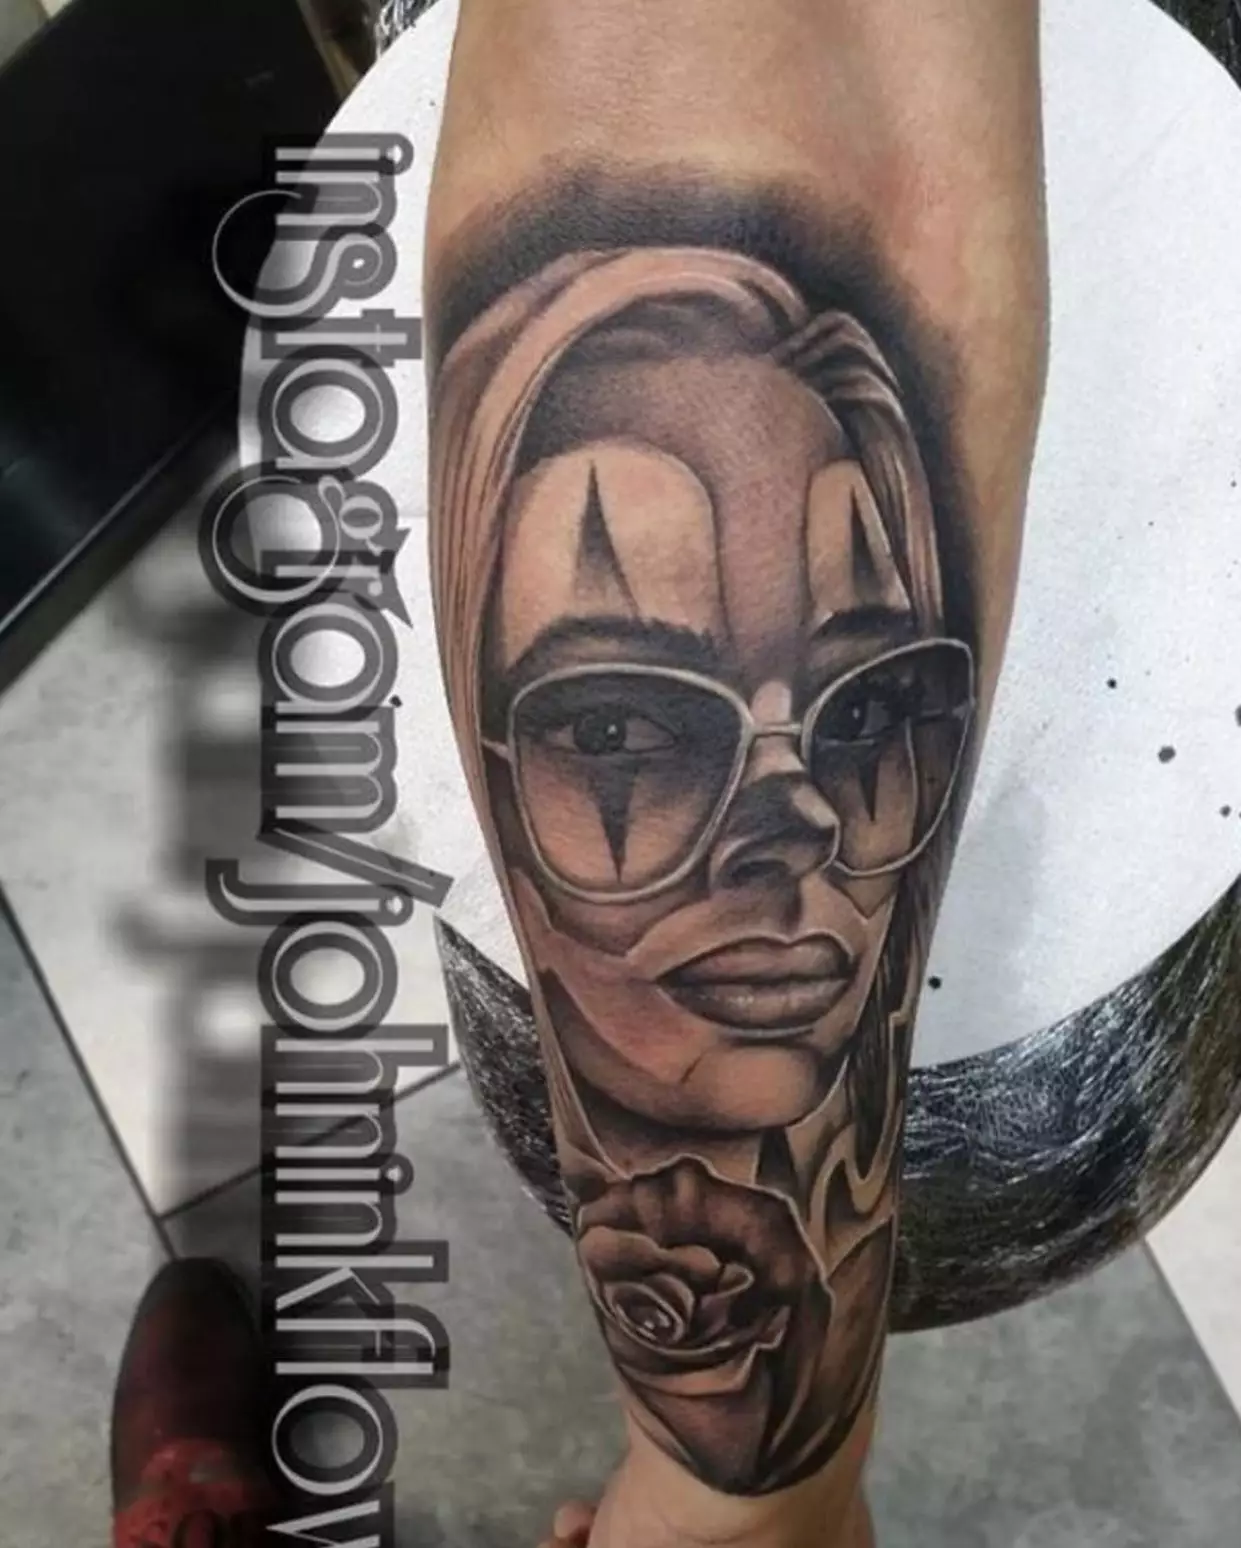 Some tattoo artists are adding their own twists to Ellie's photos.